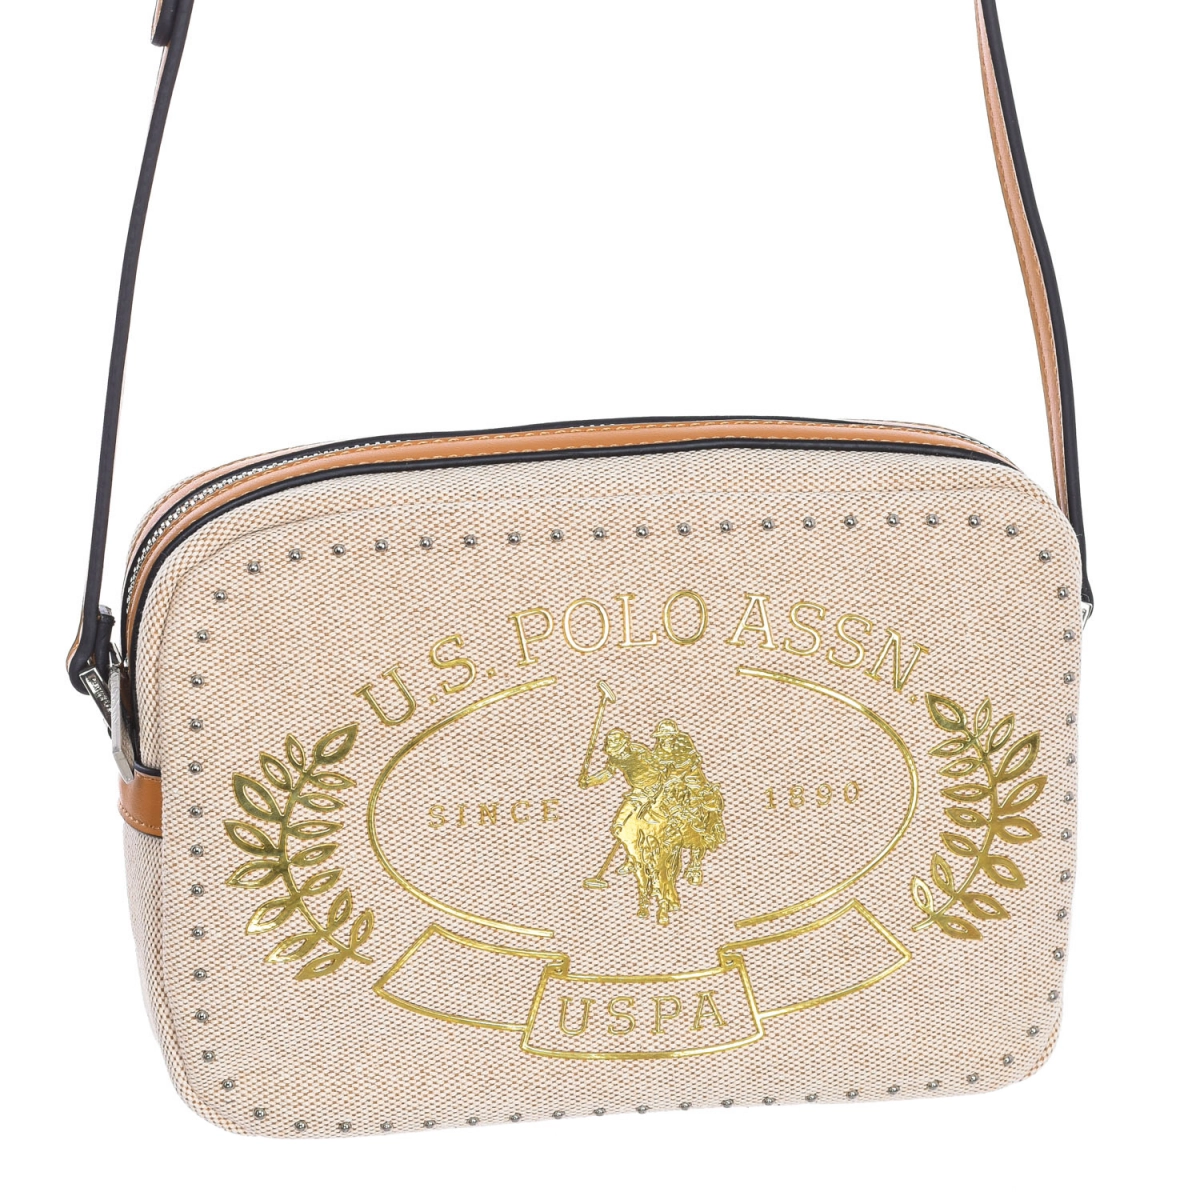 Bolso crossbody U.S. POLO ASSN. BEUWH5415WUP mujer Talla: TU Color: Beige BEUWH5415WUP-DARK YELLOW.TU